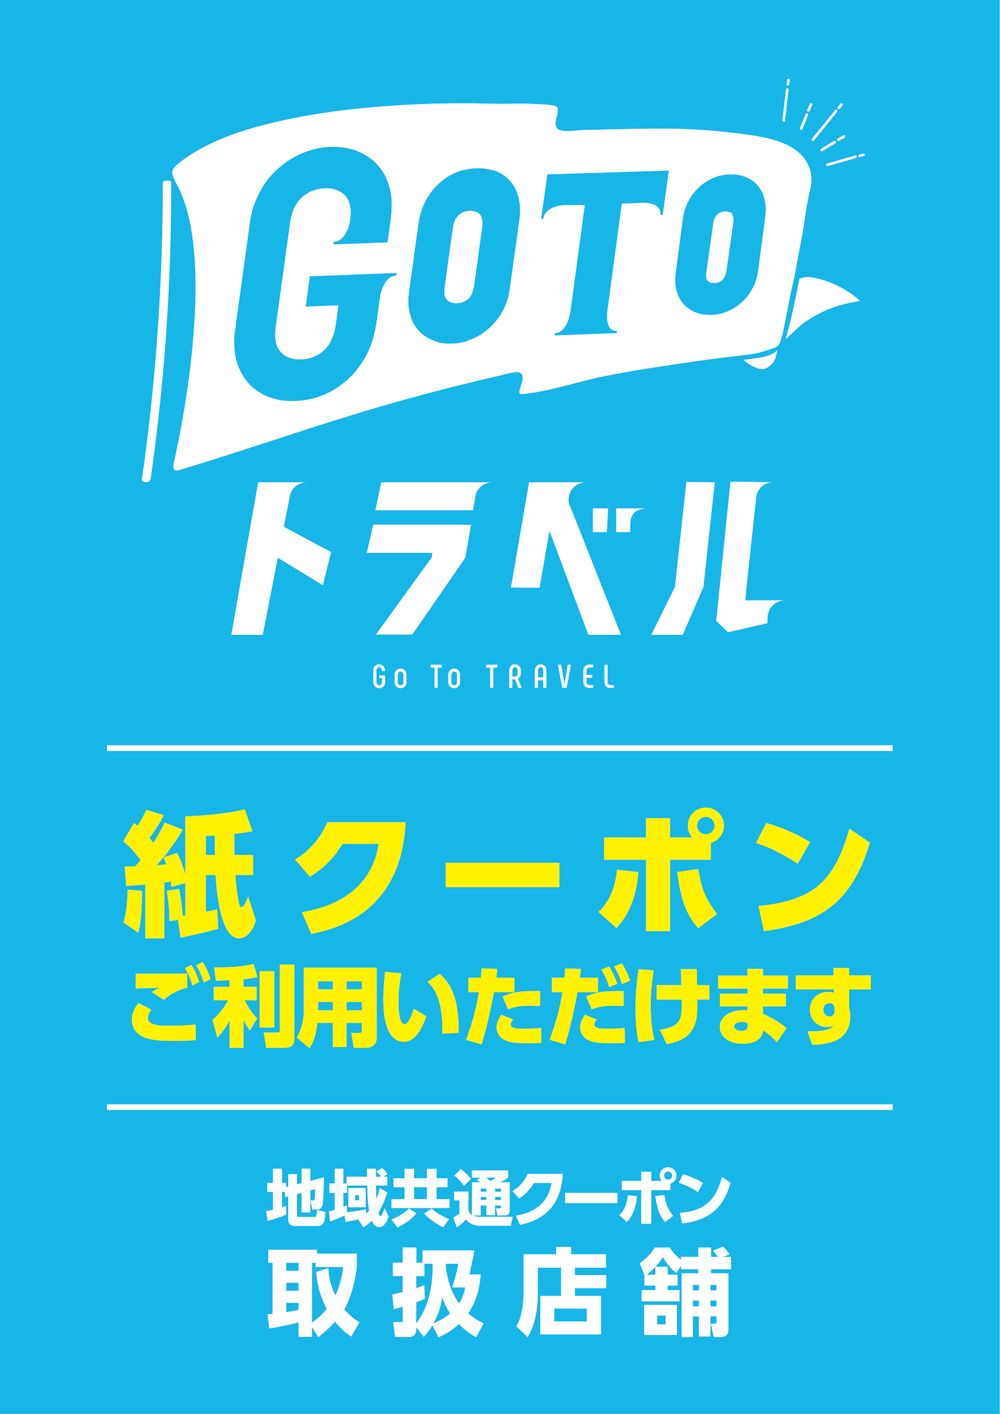 Go To TRAVEL（地域共通クーポン券）